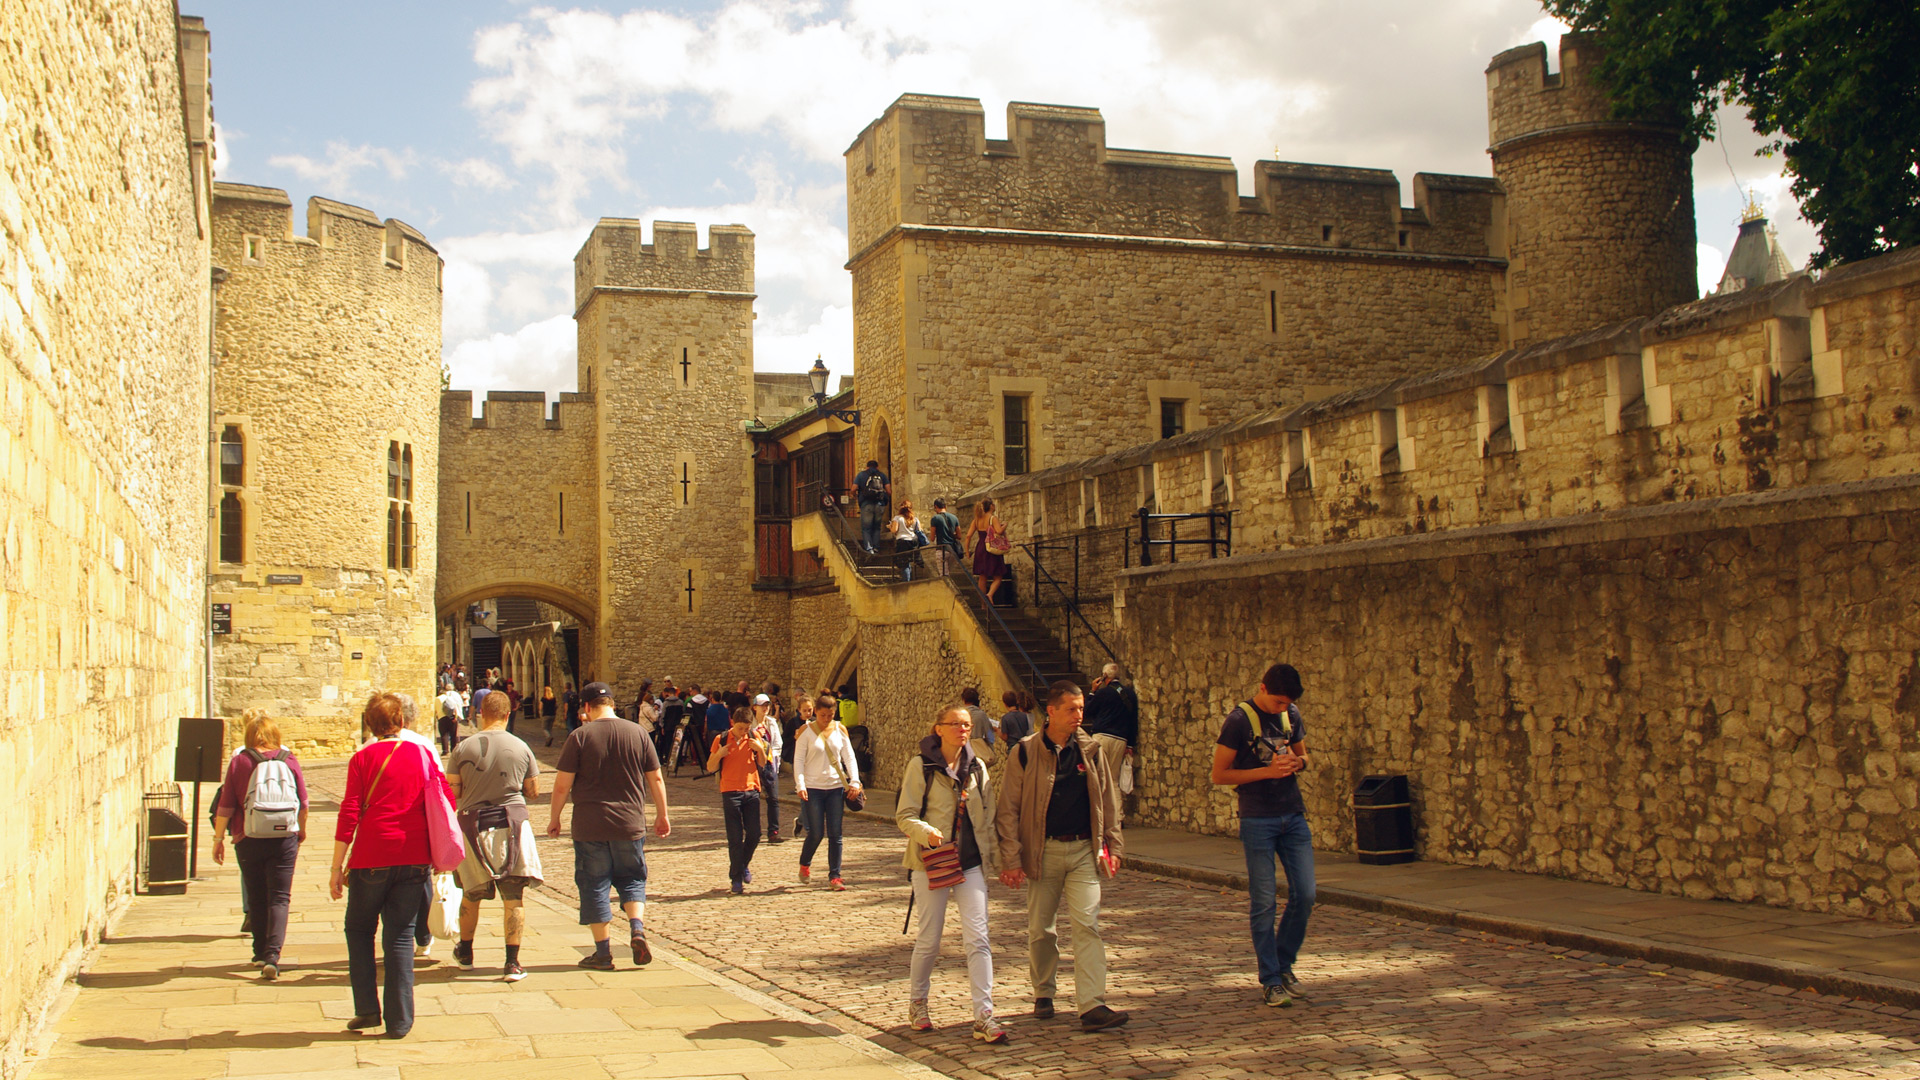 Inside the Entrance - Tower of London